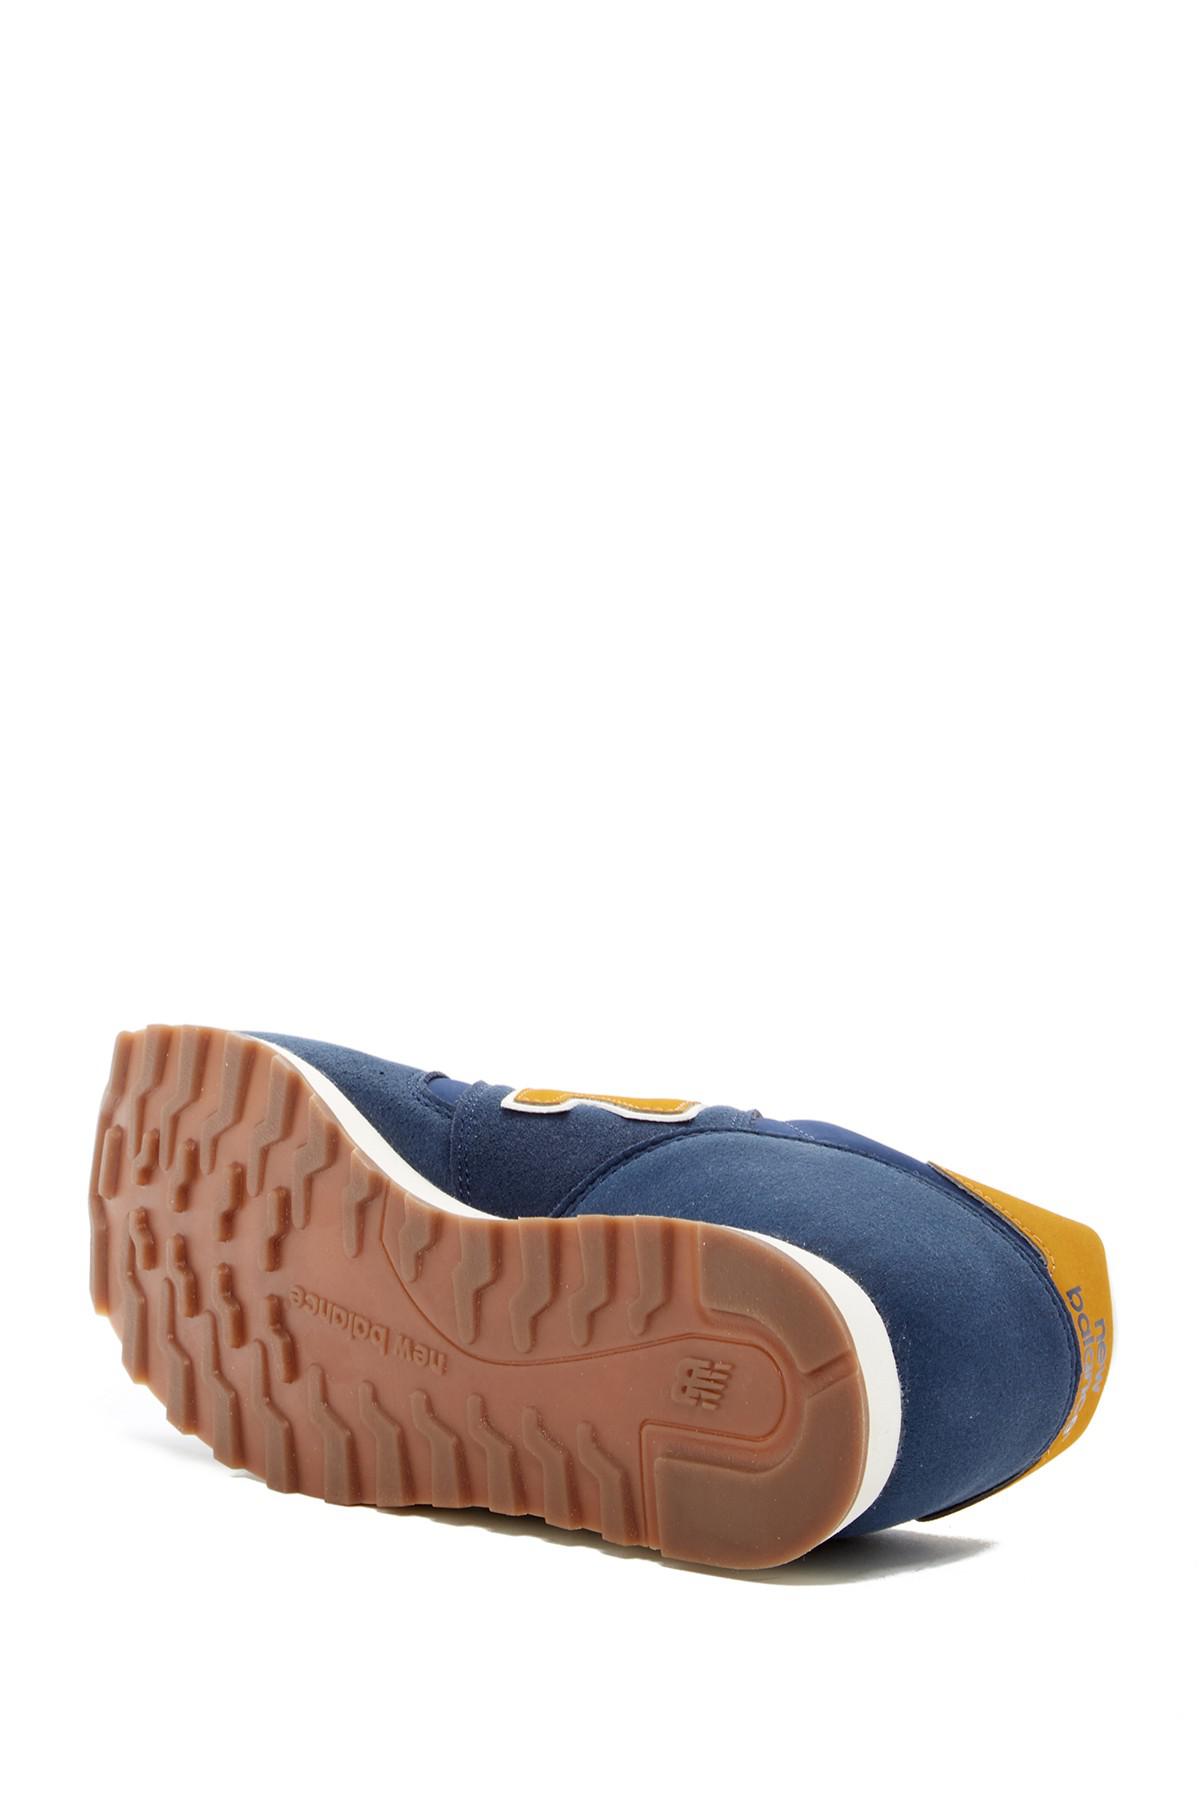 New Balance Ml373 Classic Sneaker - Wide Width Available in Blue-Yellow ( Blue) for Men - Lyst